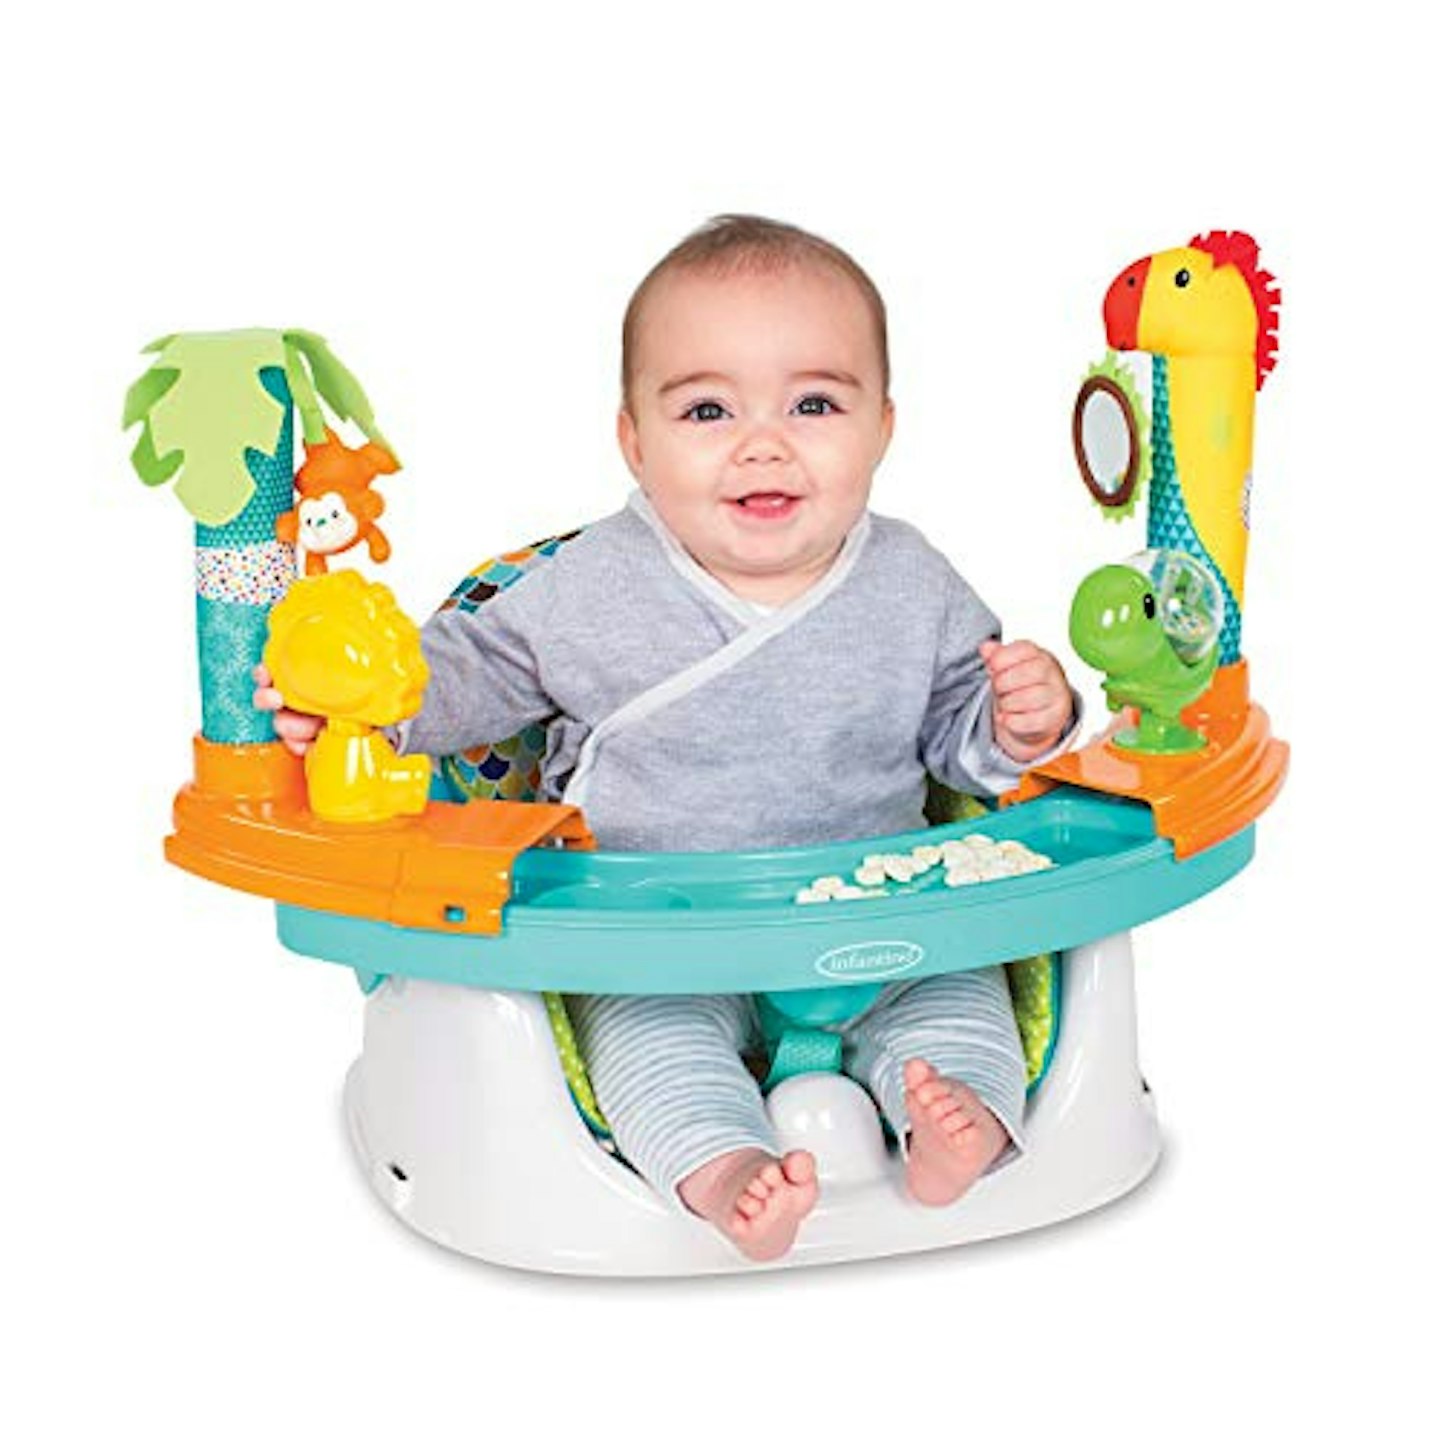 Infantino Grow-With-Me Discovery Seat u0026amp; Booster